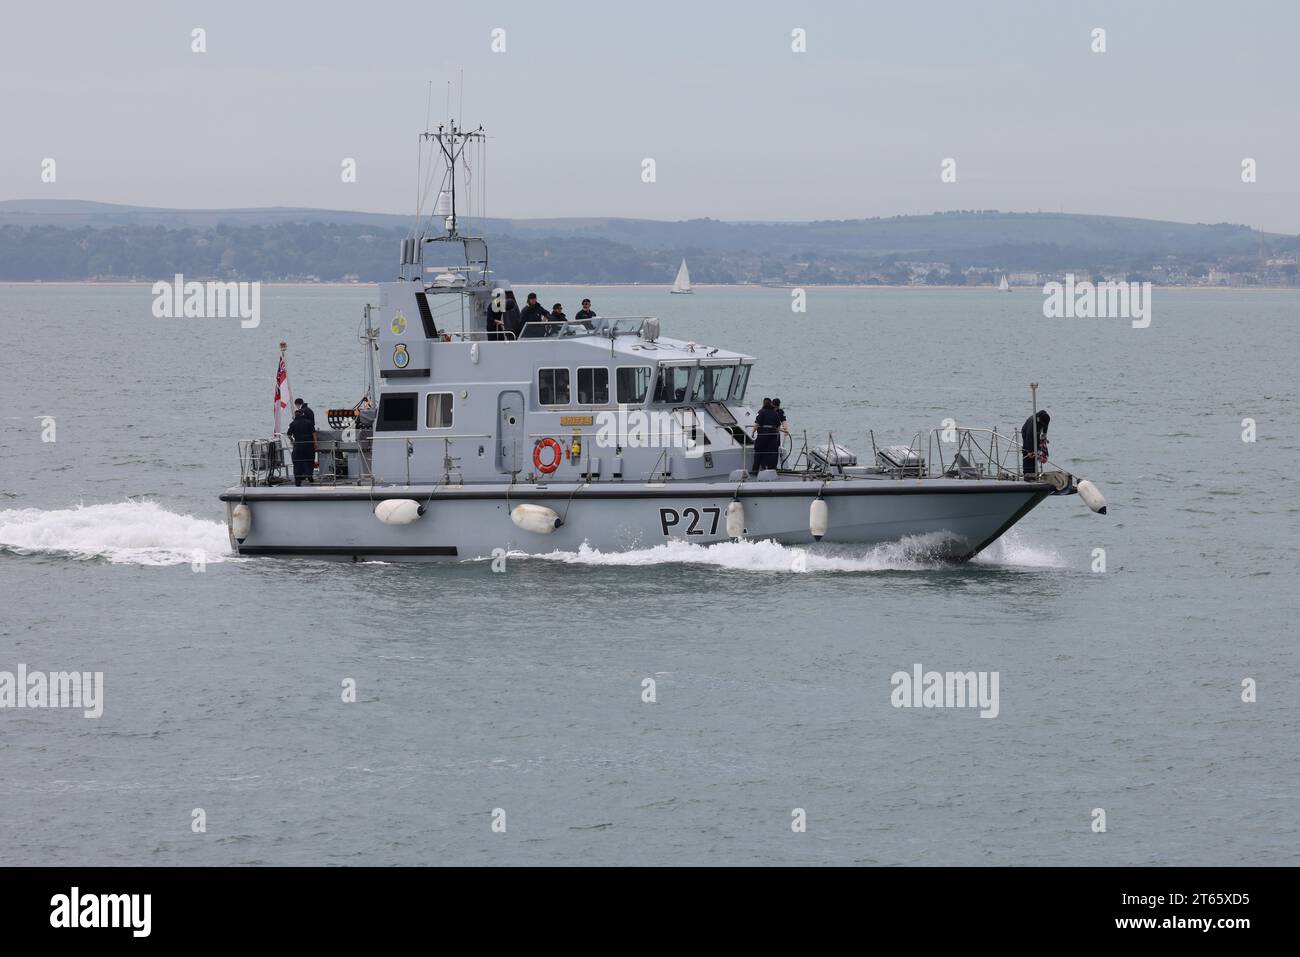 The Royal Navy Fast Training Boat HMS SMITER (P272) approaching the Naval Base Stock Photo